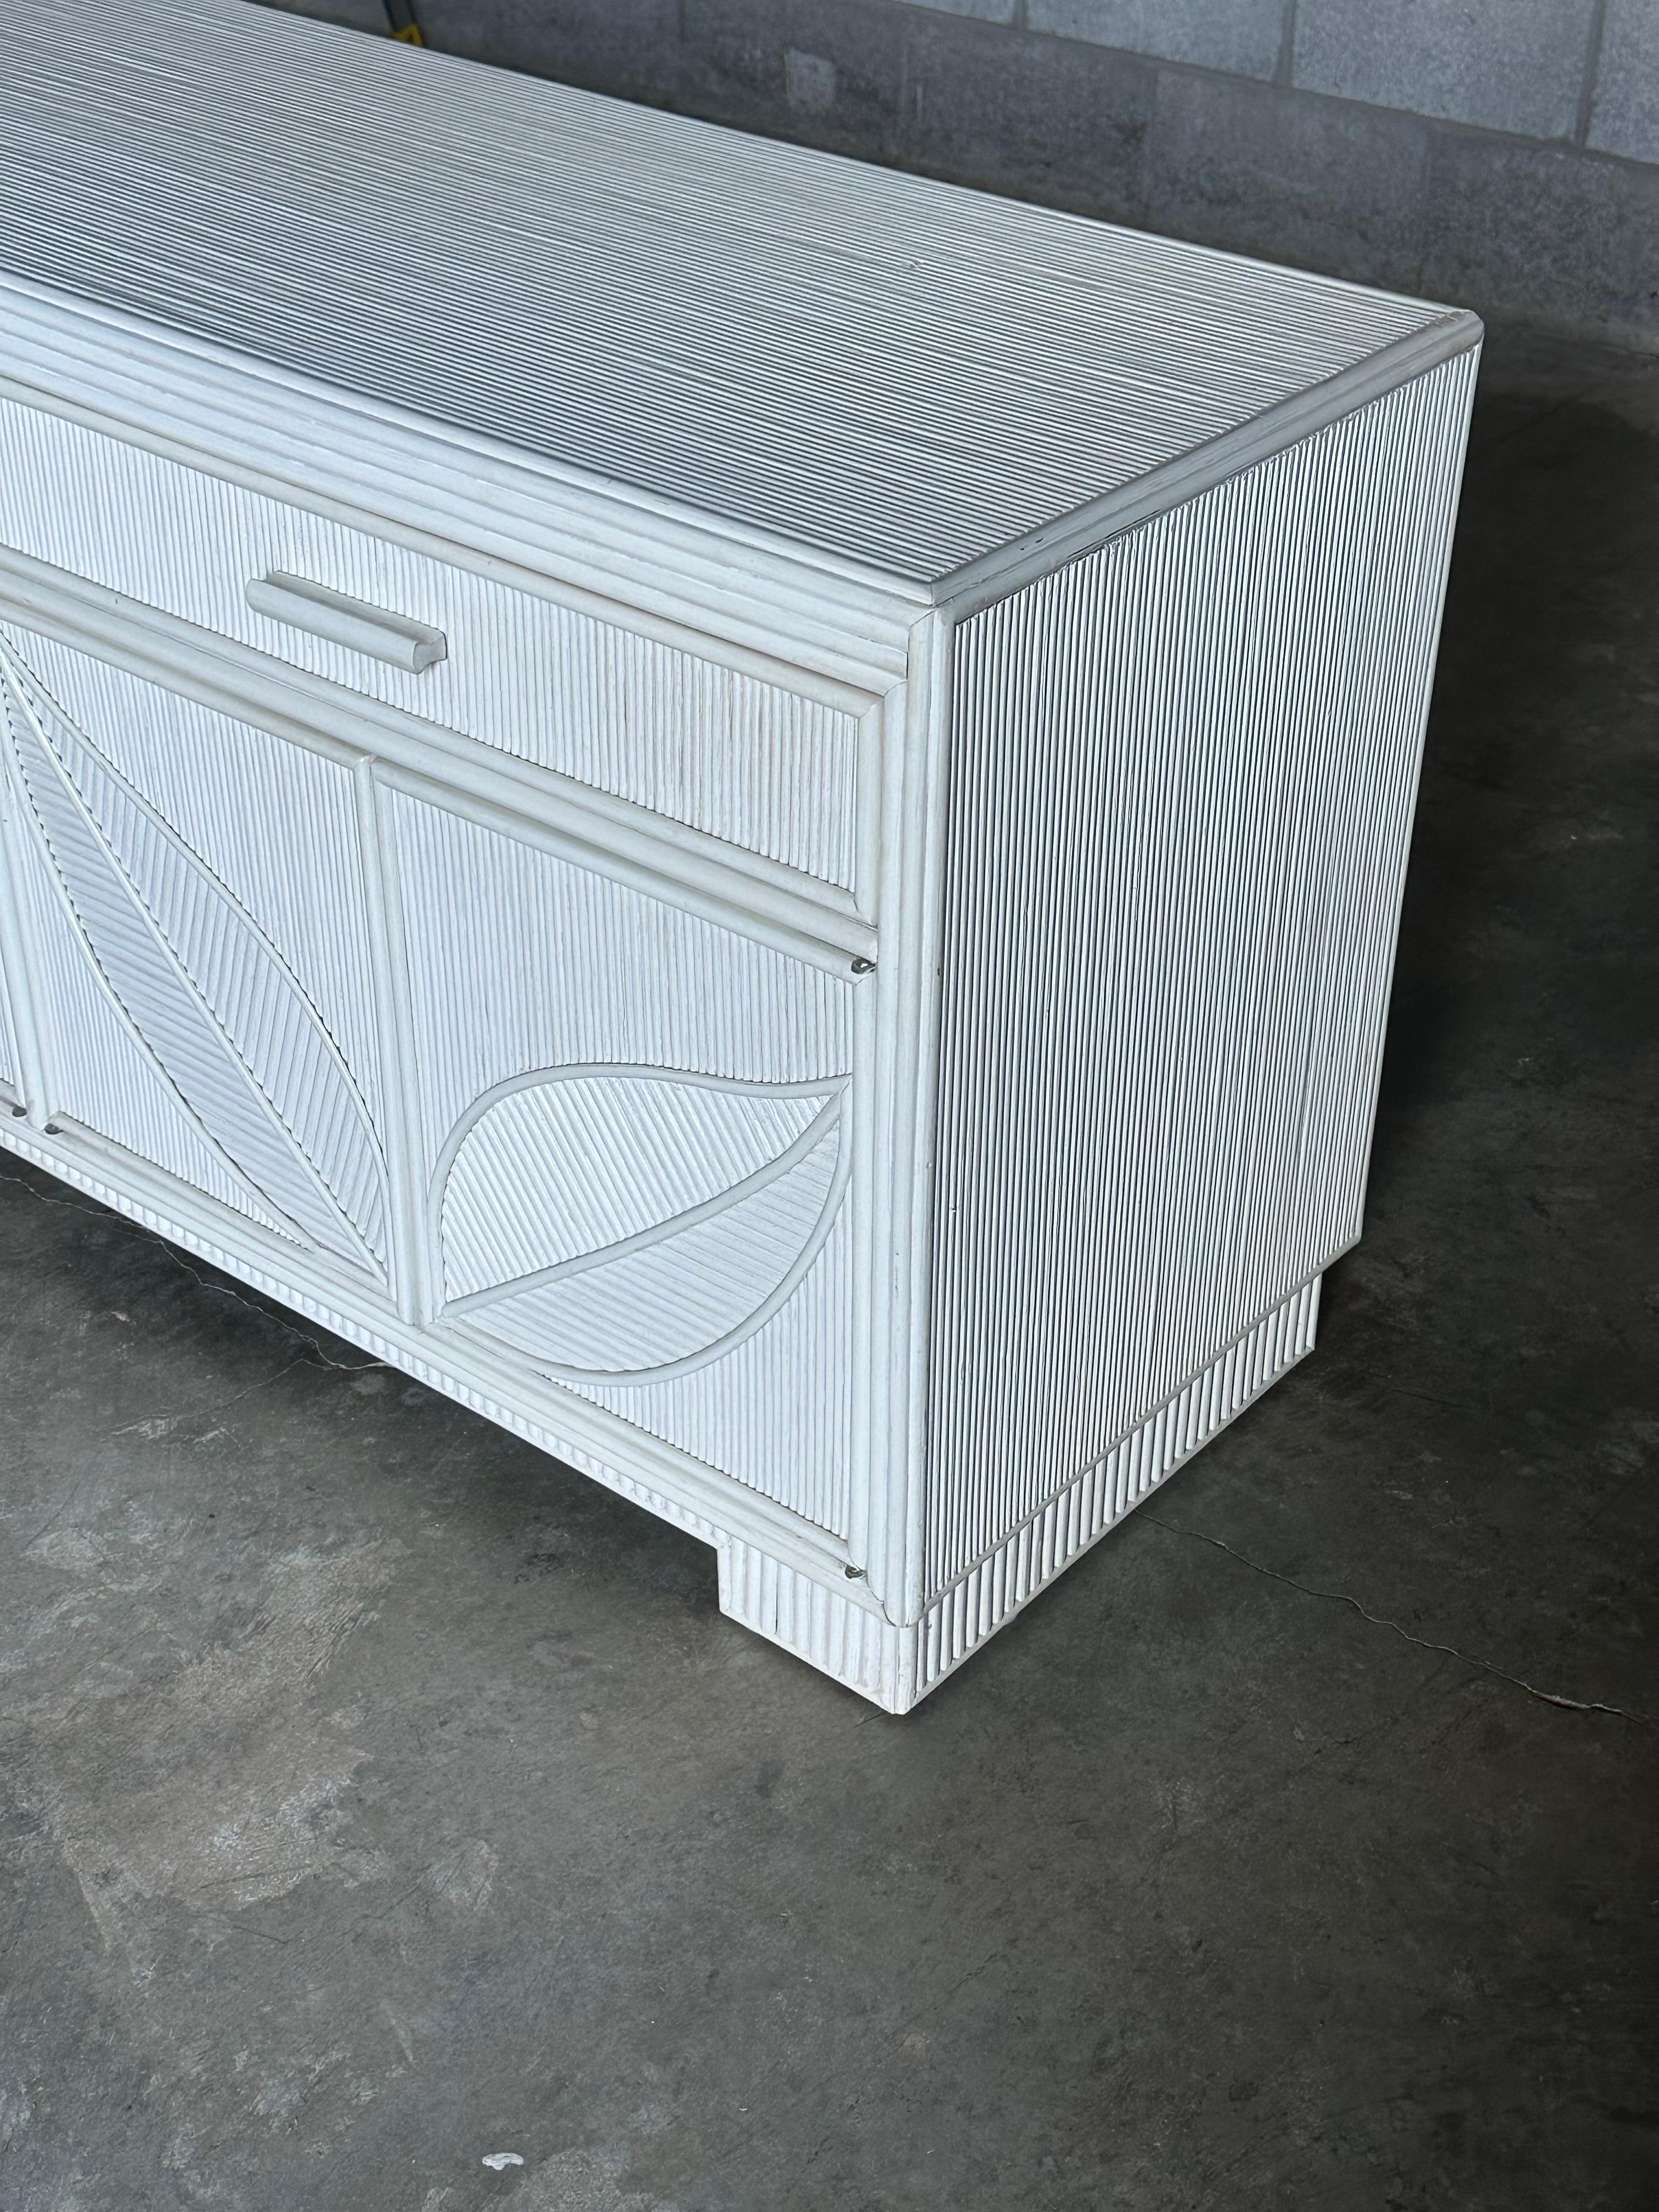 Late 20th Century Pencil Reed White Sideboard With Leaf Motif For Sale 2